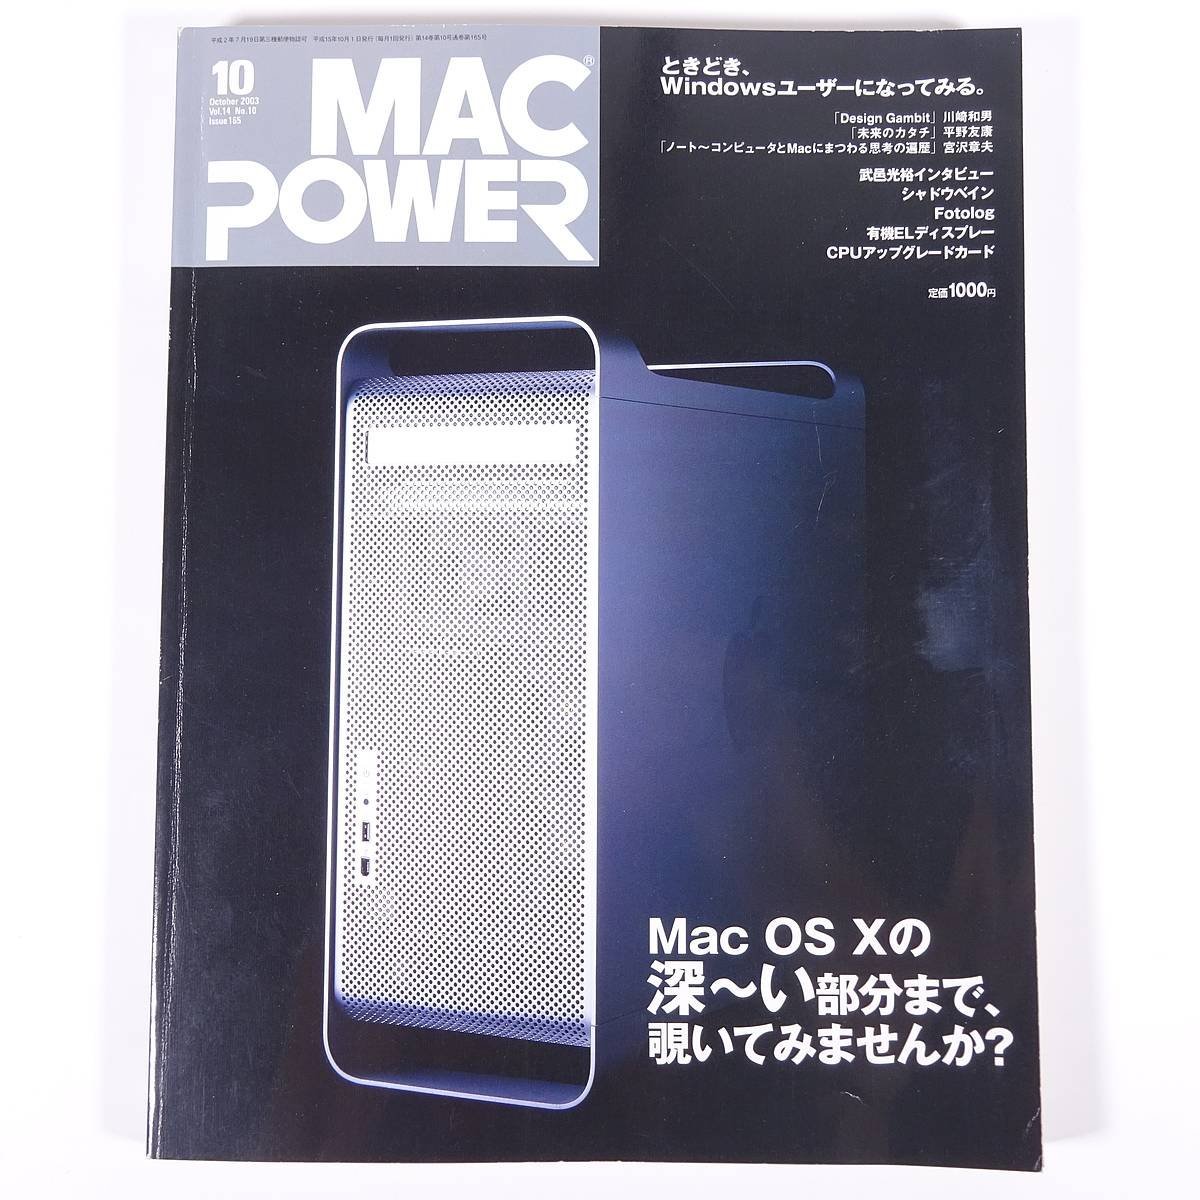 MACPOWER Mac power issue165 2003/10 ASCII ASCII magazine PC personal computer Macintosh special collection * have machine EL G4 card SHADOWBANE another 